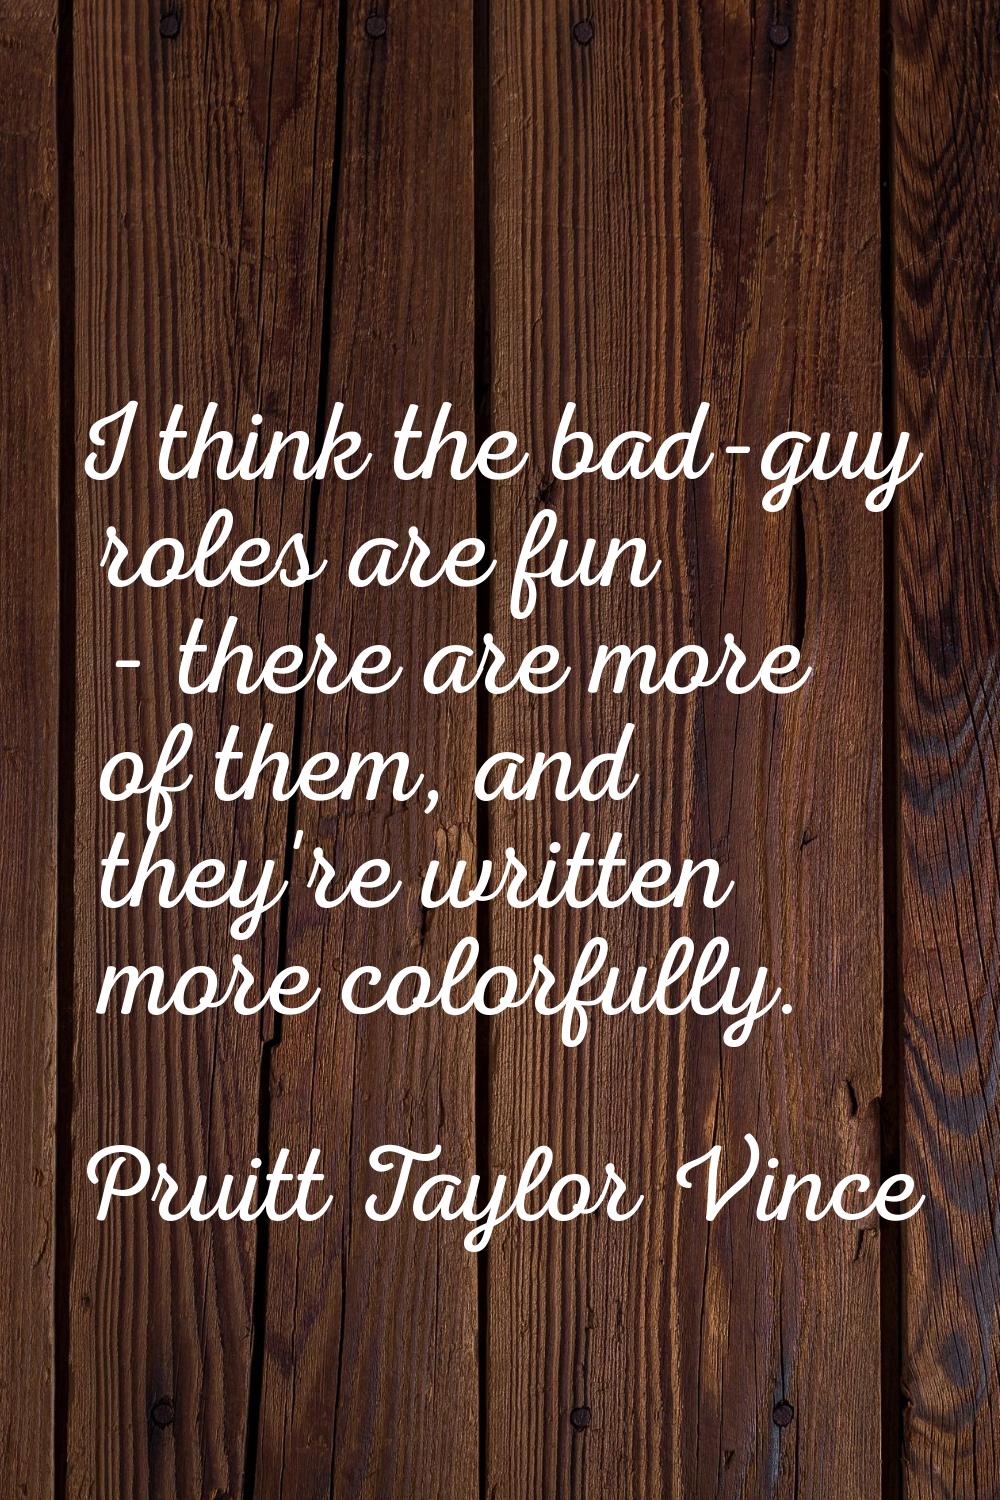 I think the bad-guy roles are fun - there are more of them, and they're written more colorfully.